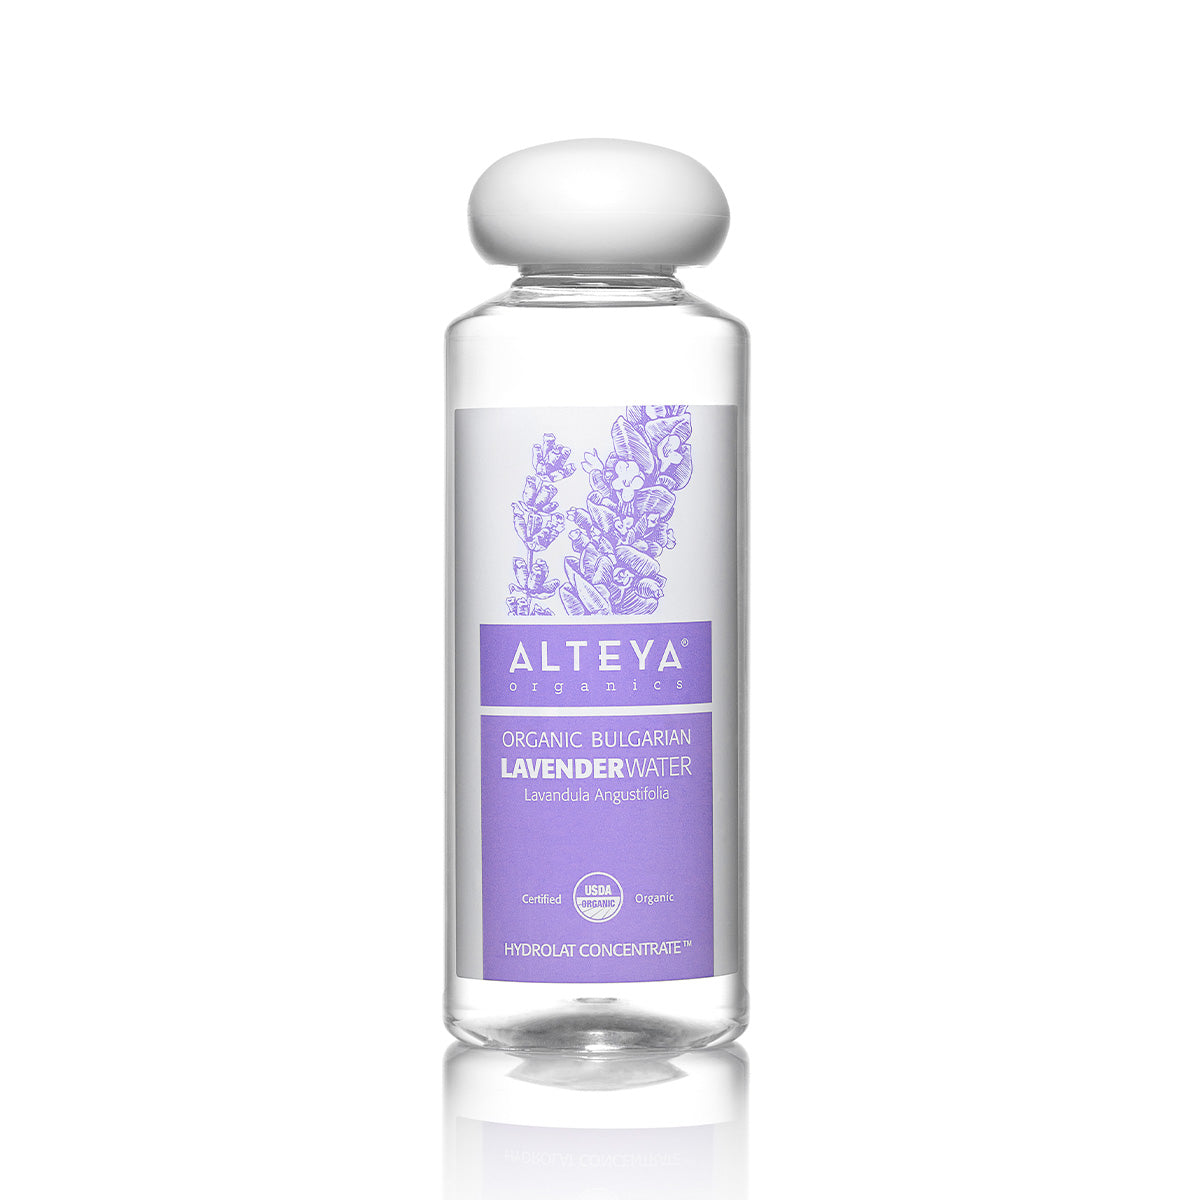 Alteya’s 100% pure, steam distilled lavender water is made of fresh, organic lavender blossoms – one of the most valuable and widely used essential oil-bearing plants. By using a unique distillation technique, which embodies century-old traditions and modern technologies we distill special grade lavender flower water that preserves the biodynamic balanced energy of the plant.